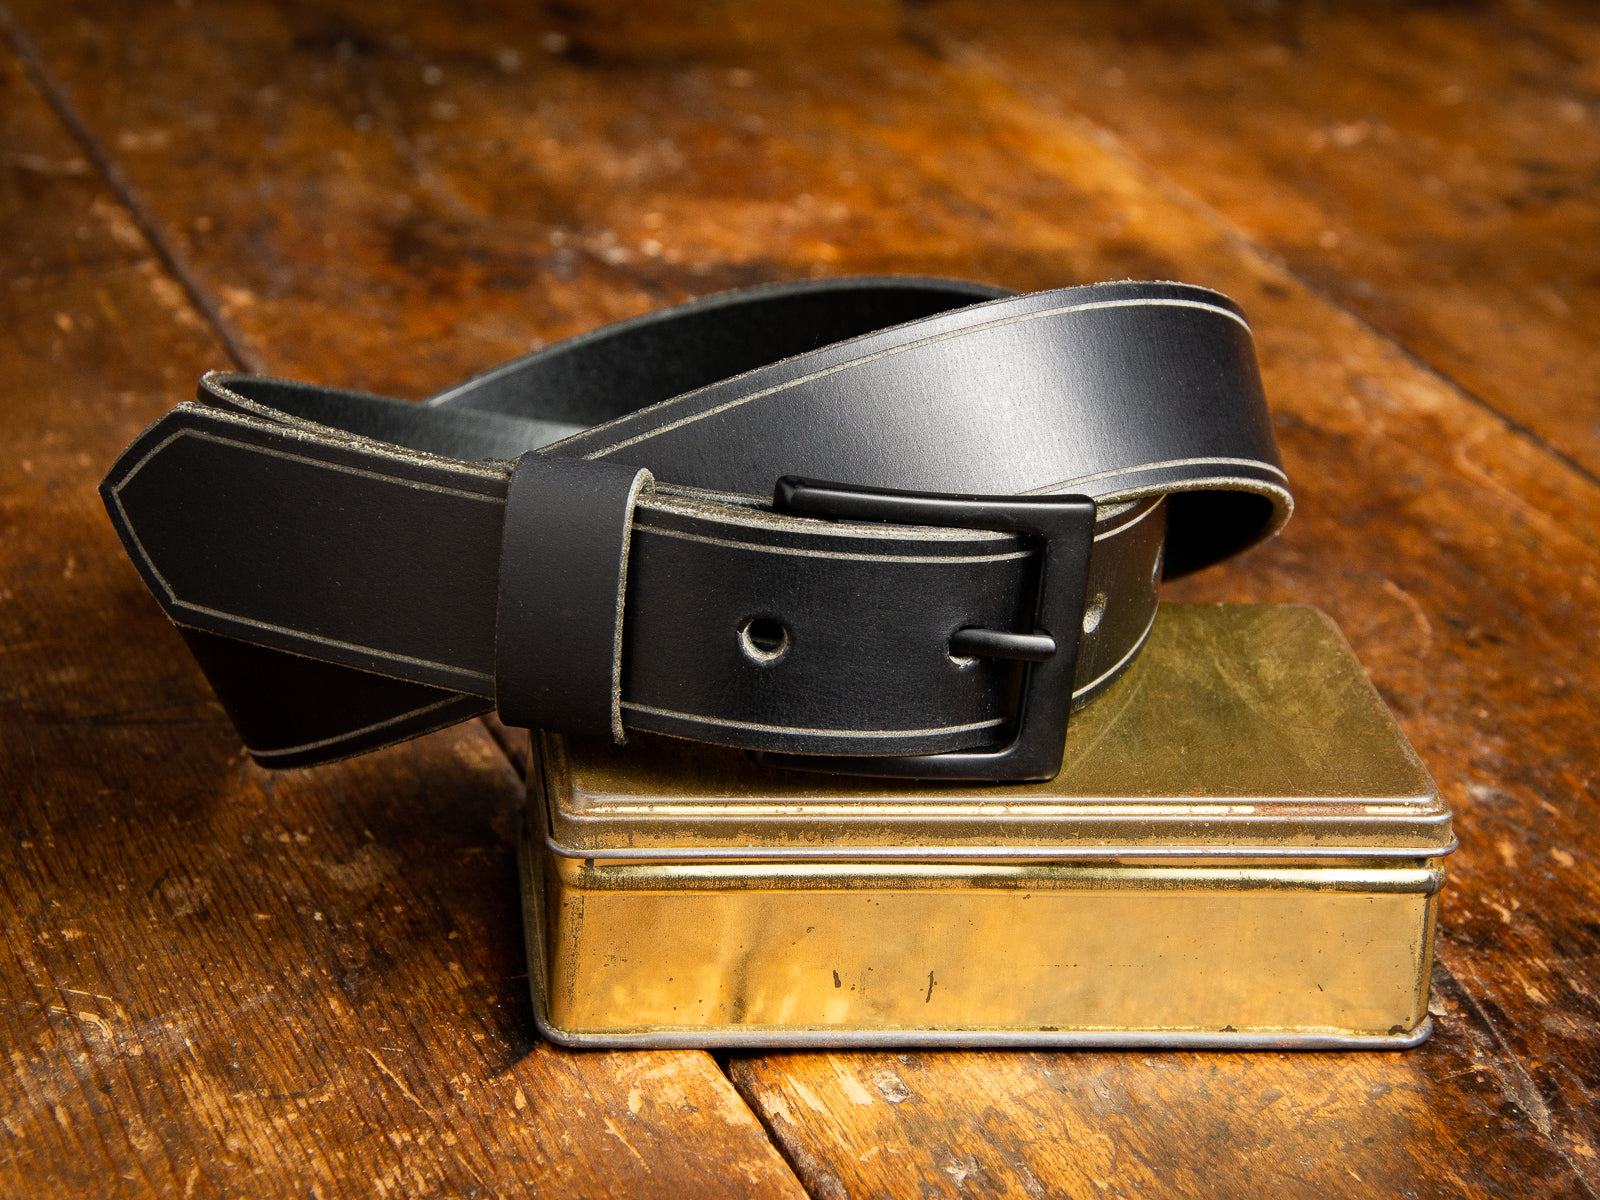 The Sterling Dress Belt in black shown resting on a brass tin.